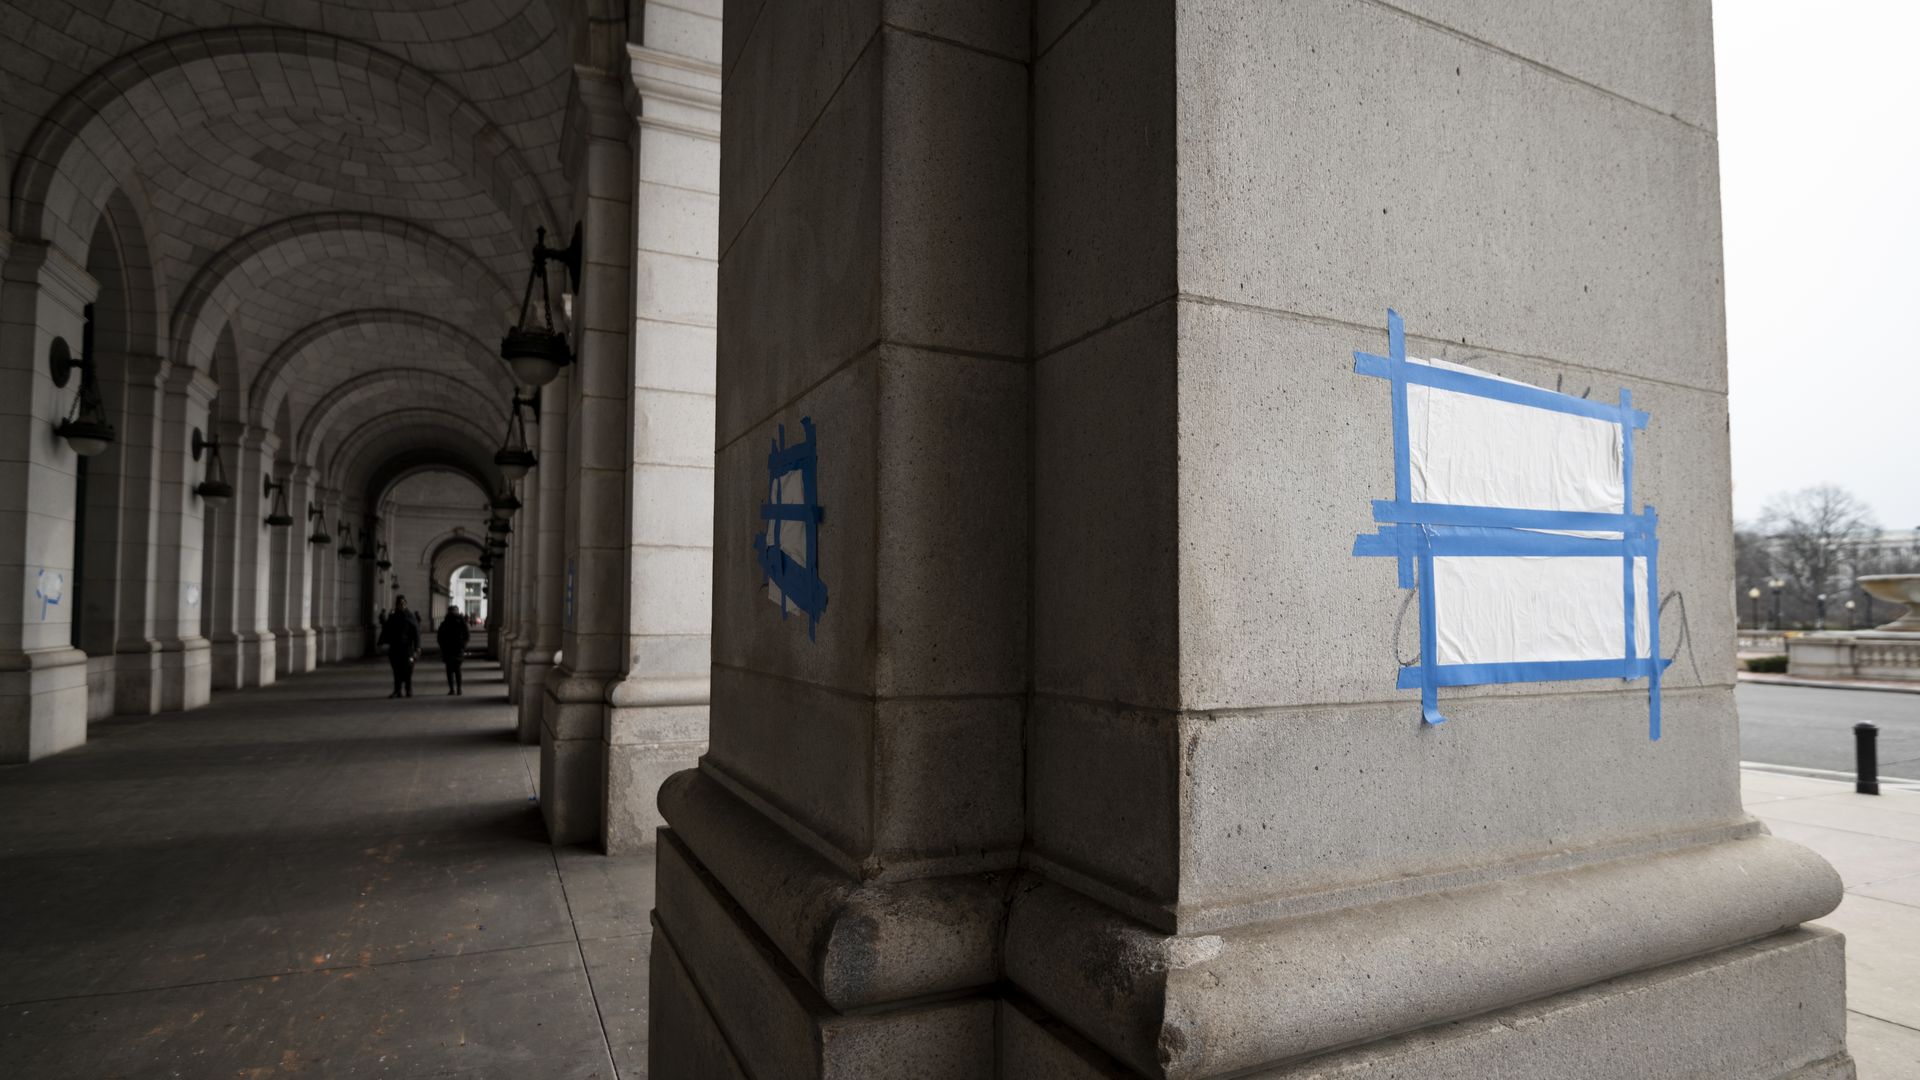 Dozens of swastikas and anti-Obama slogans, most of them covered up by workers, were drawn on pillars around the exterior of Union Station in Washington on Friday, Januarey 28, 2022. 